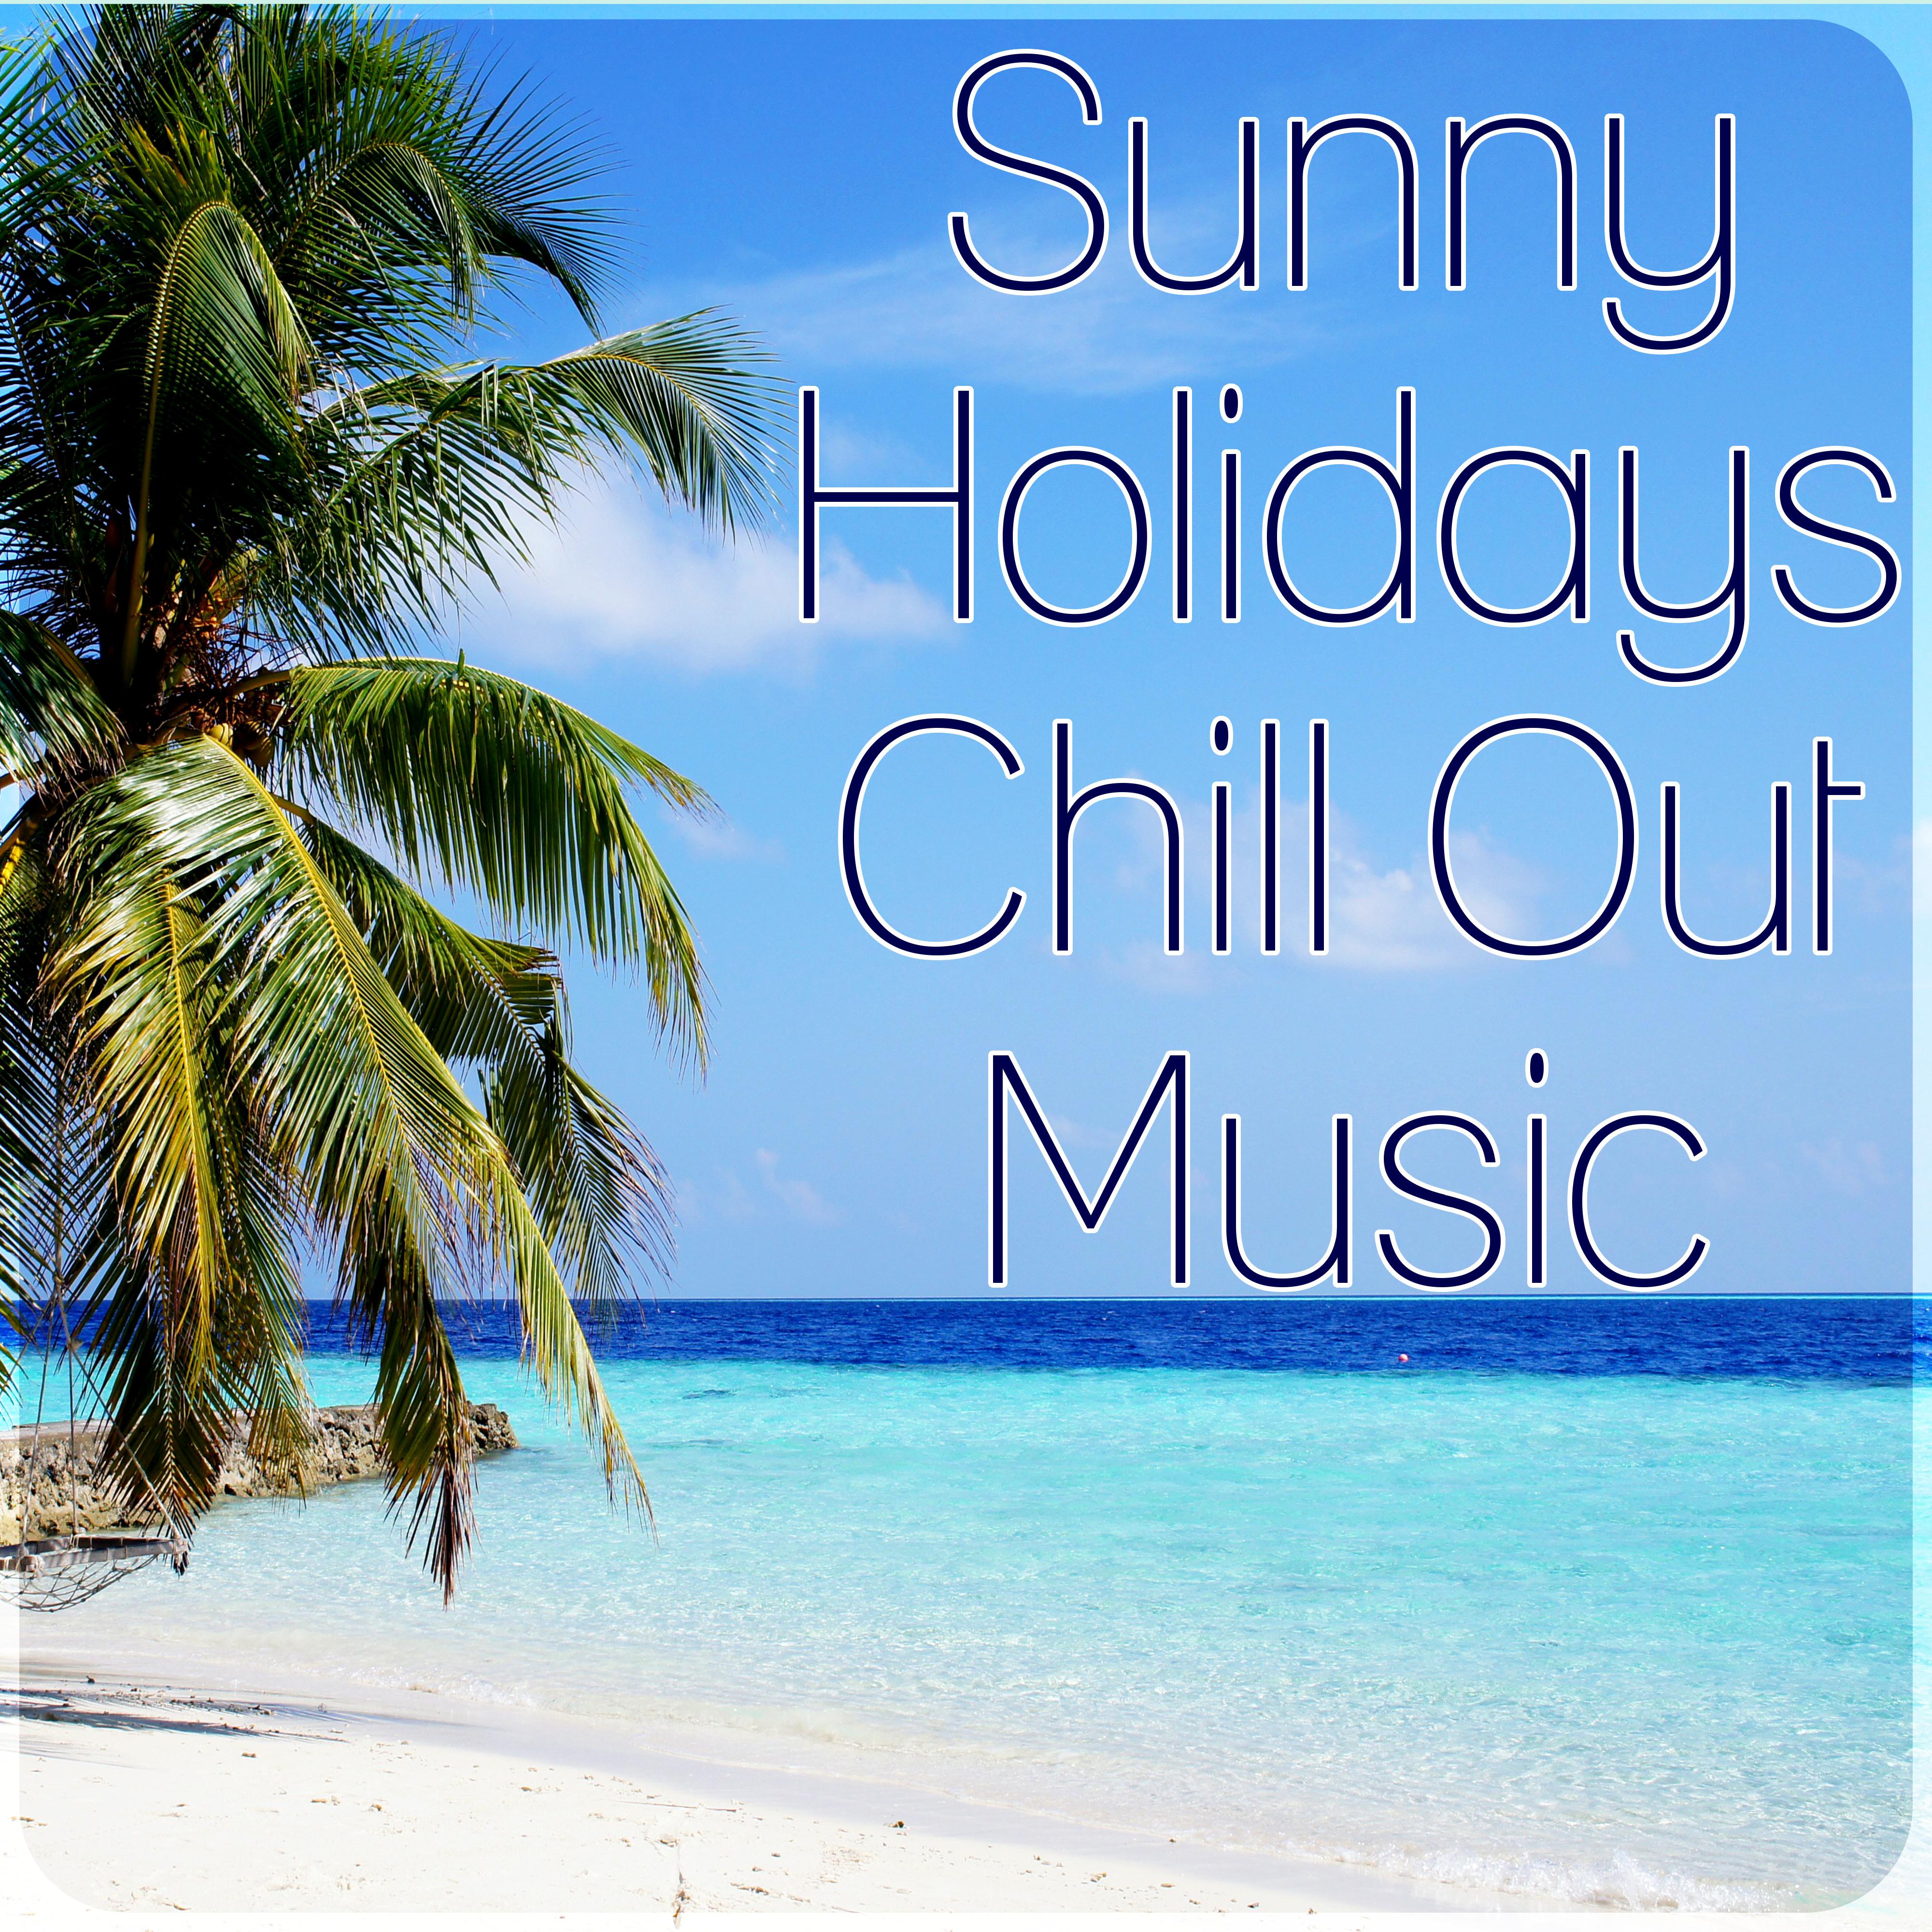 Sunny Holidays Chill Out Music – Chill Out Music to Dance, Lounge Summer, Wild Journey Tropical Lounge, Positive Energy, Deep Vibes, Tropical Sounds, Chill Out Music